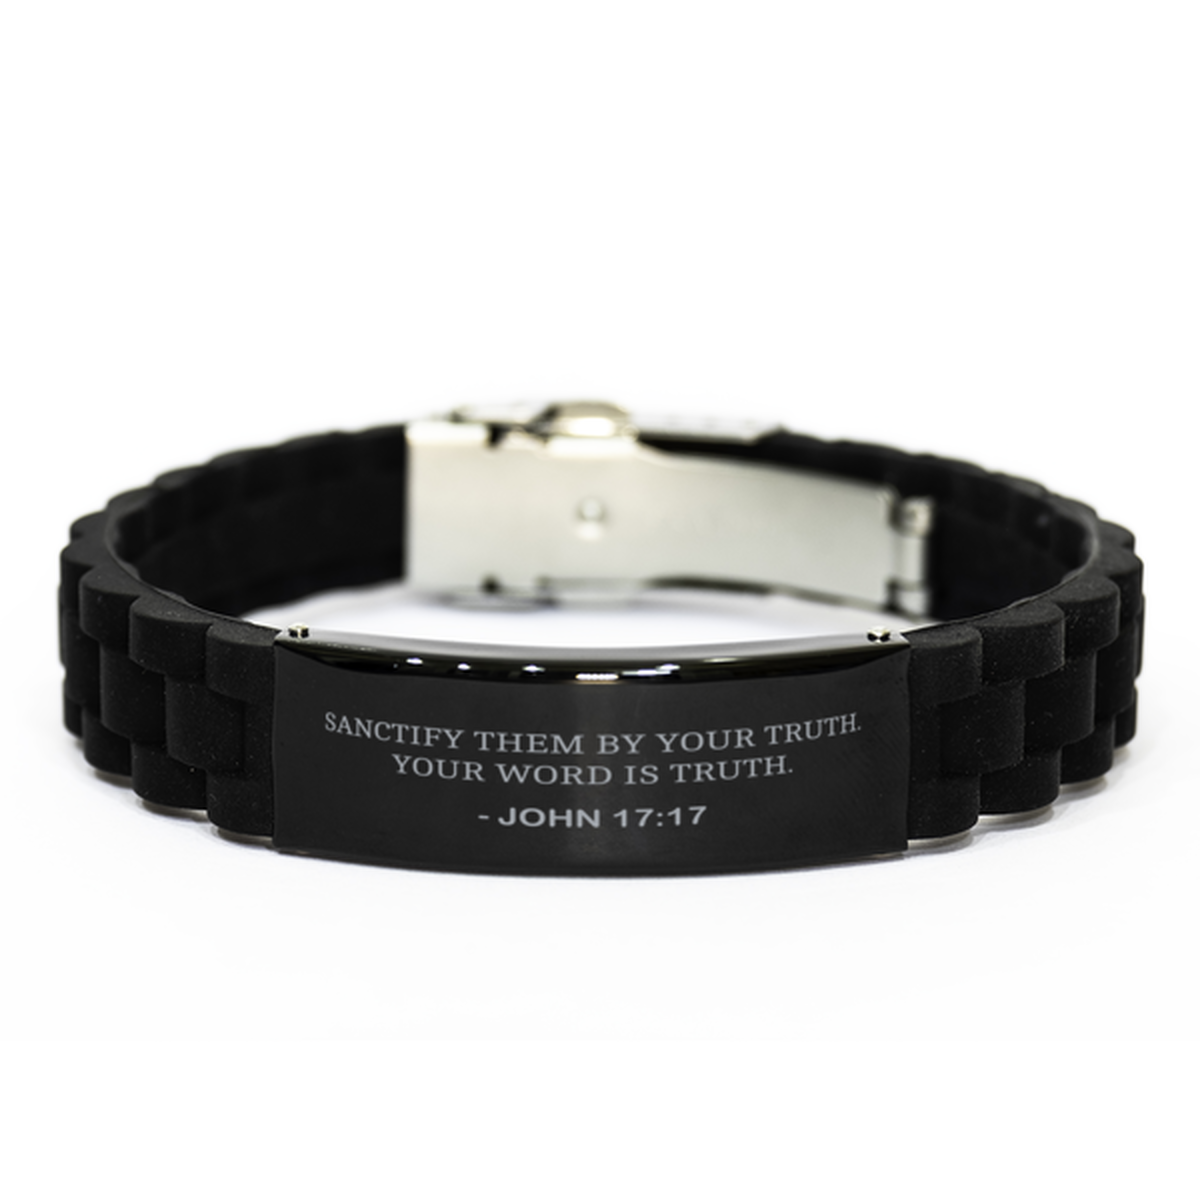 Bible Verse Black Bracelet,, John 17:17 Sanctify Them By Your Truth. Your Word Is, Inspirational Christian Gifts For Men Women